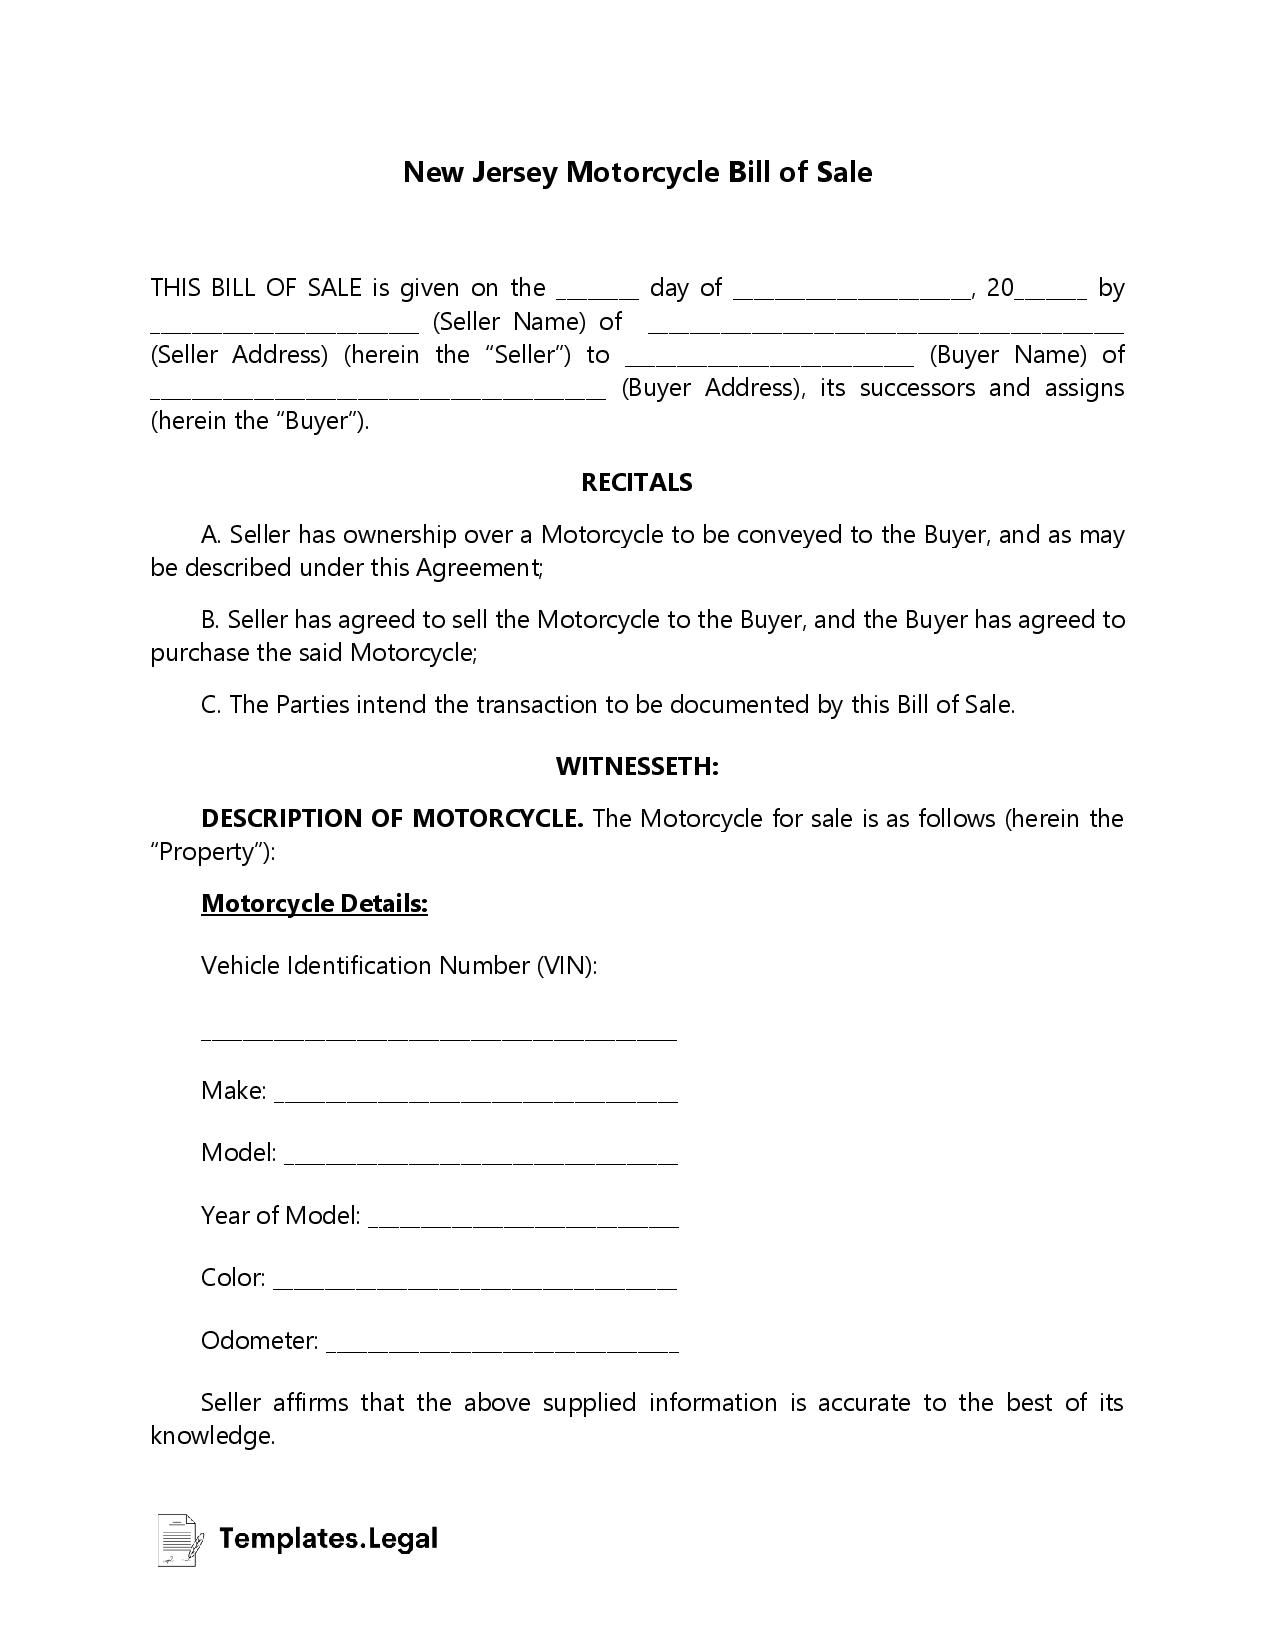 New Jersey Motorcycle Bill of Sale - Templates.Legal